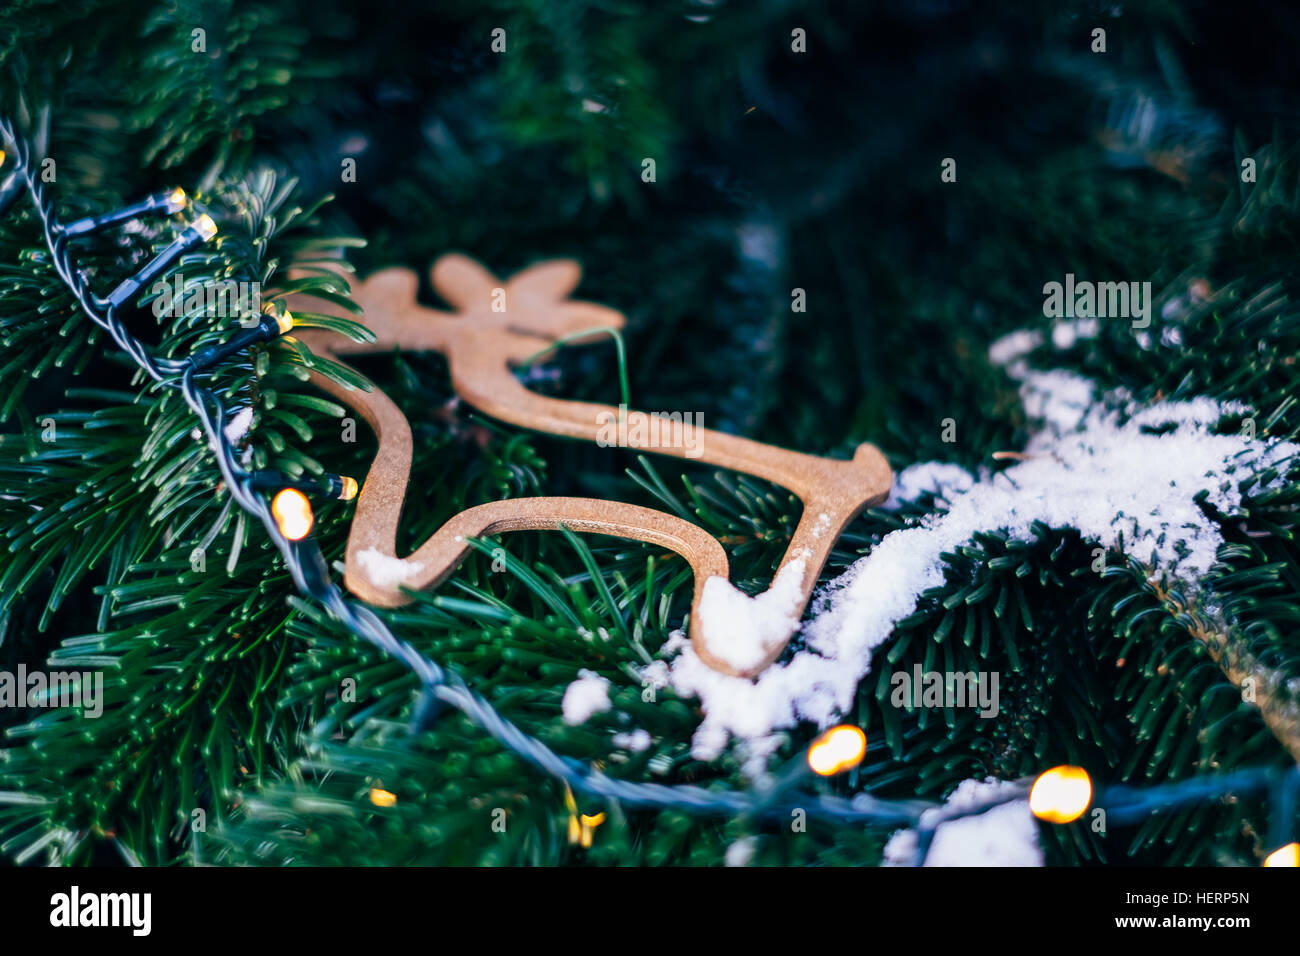 Close-up of reindeer decoration and lights on a Christmas tree Stock Photo